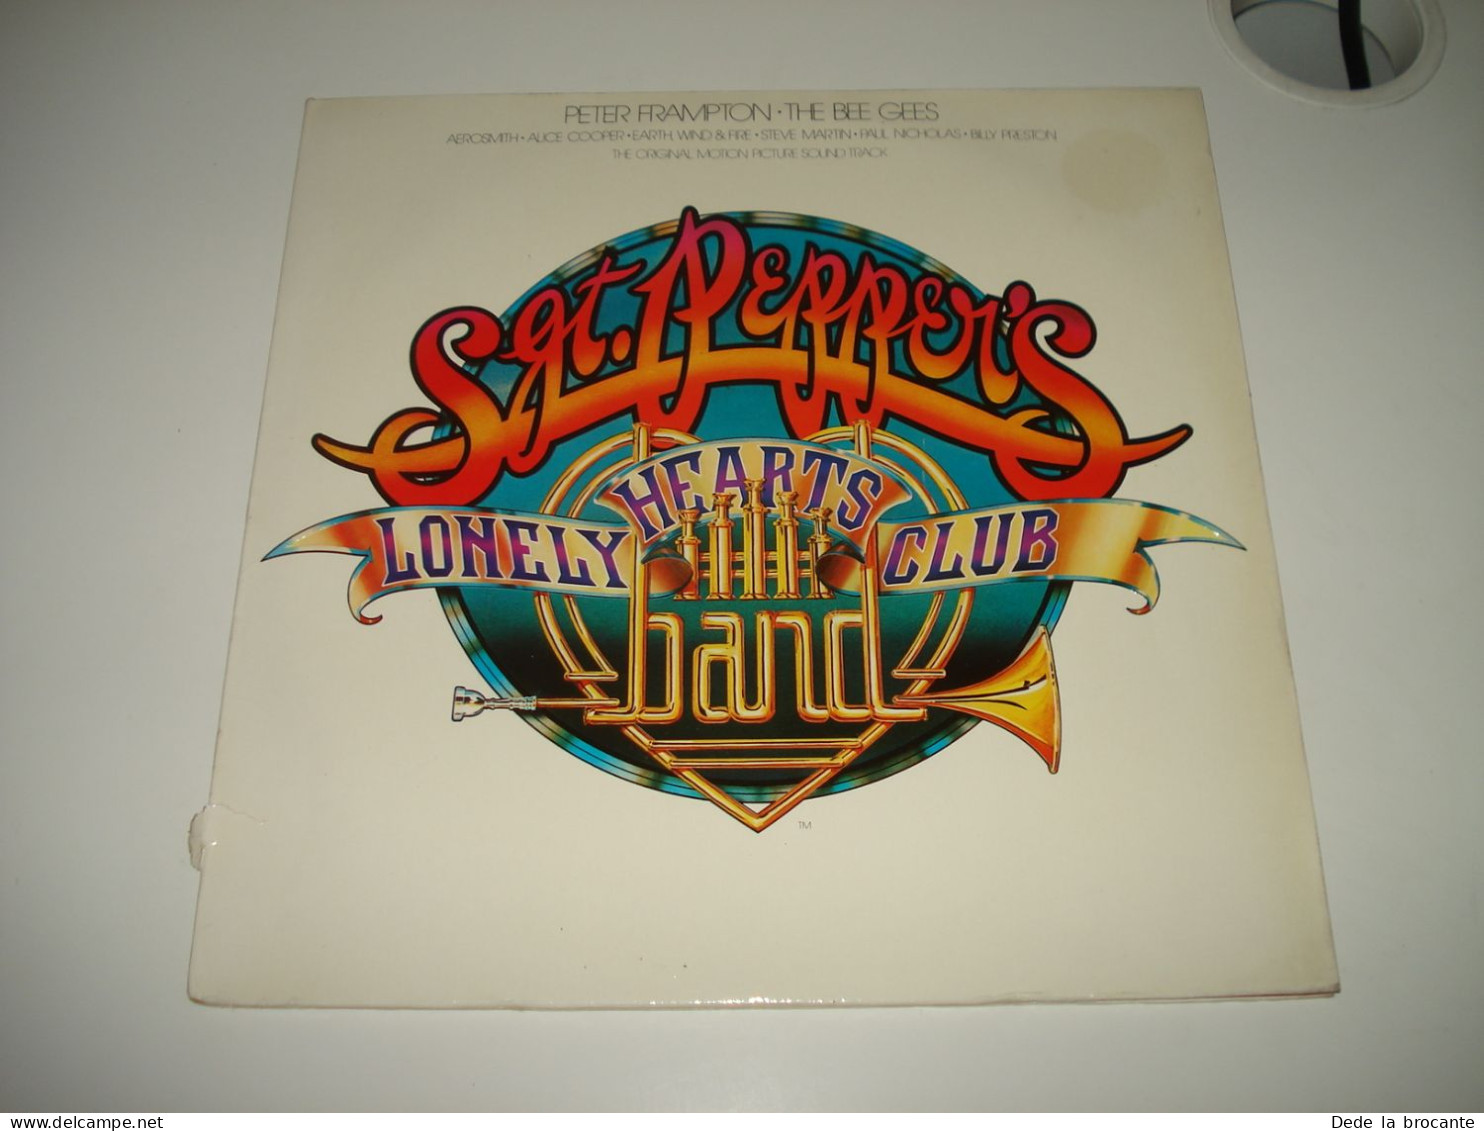 B8 / Sgt Pepper's Lonely Hearts Club Band  Bee Gees - 2658 128 - BE 1978 - M/VG+ - Soundtracks, Film Music